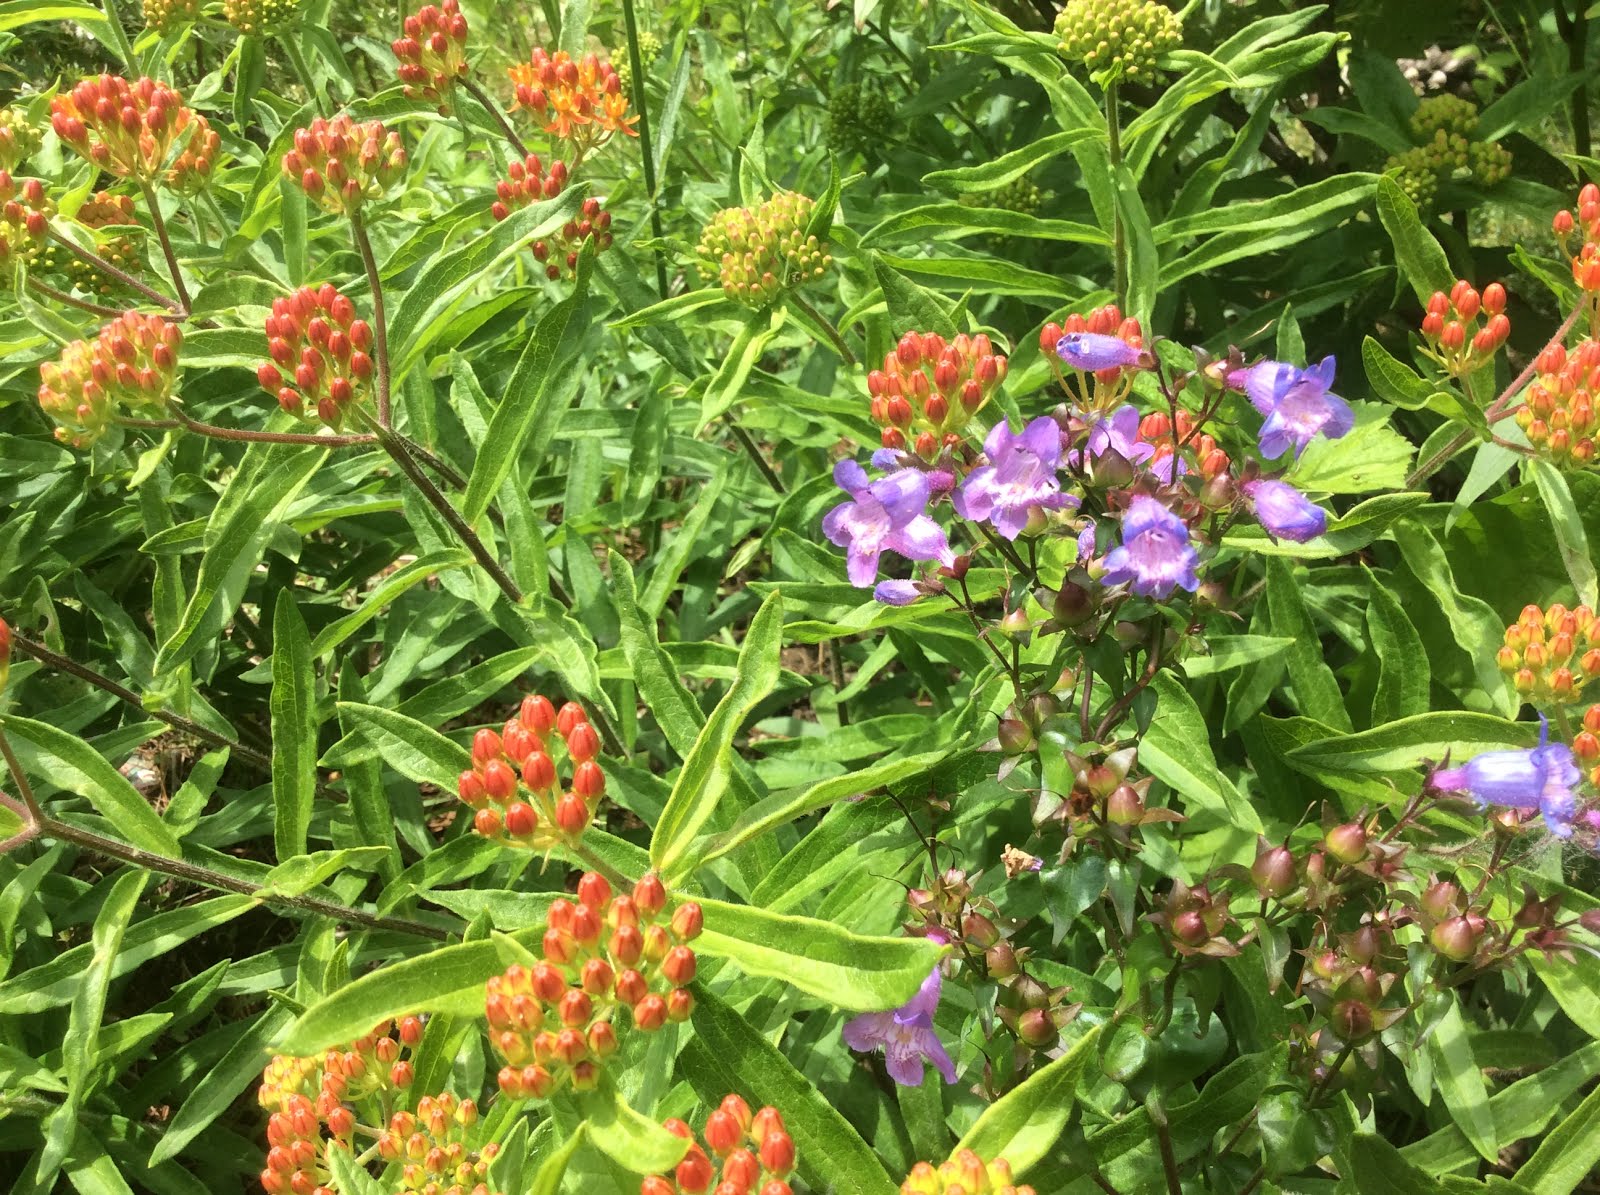 Asclepias and Penstemon